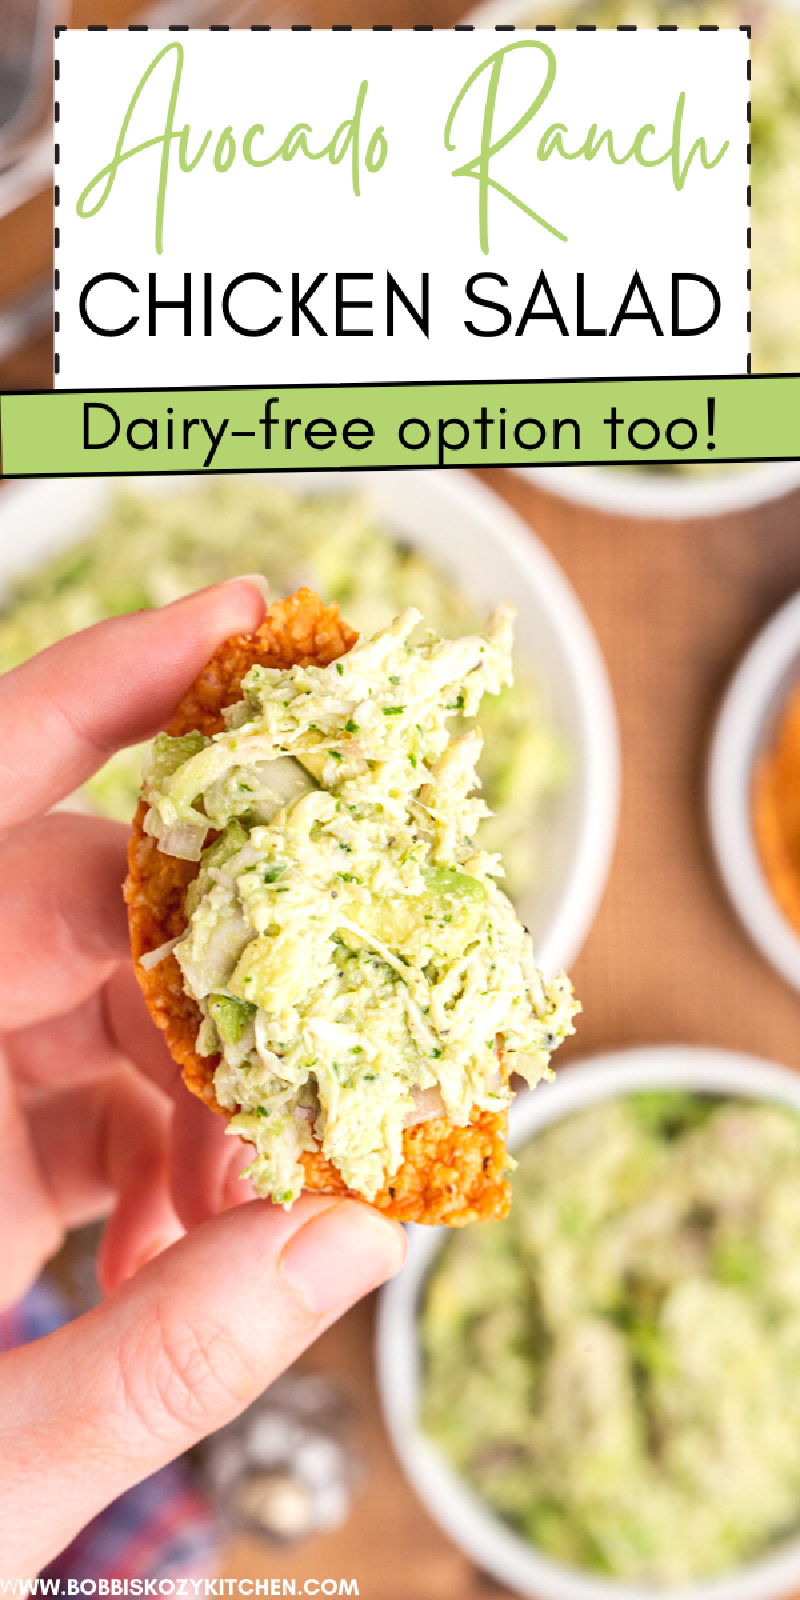 Keto Avocado Ranch Chicken Salad - This healthy keto avocado ranch chicken salad uses poached chicken but is the perfect way to use up leftover chicken, for a delicious lunch that will fill you up without weighing you down. Dairy-free option available too! #lowcarb #keto #glutenfree #dairyfree #avocado #ranch #chicken #salad #lunch #recipe